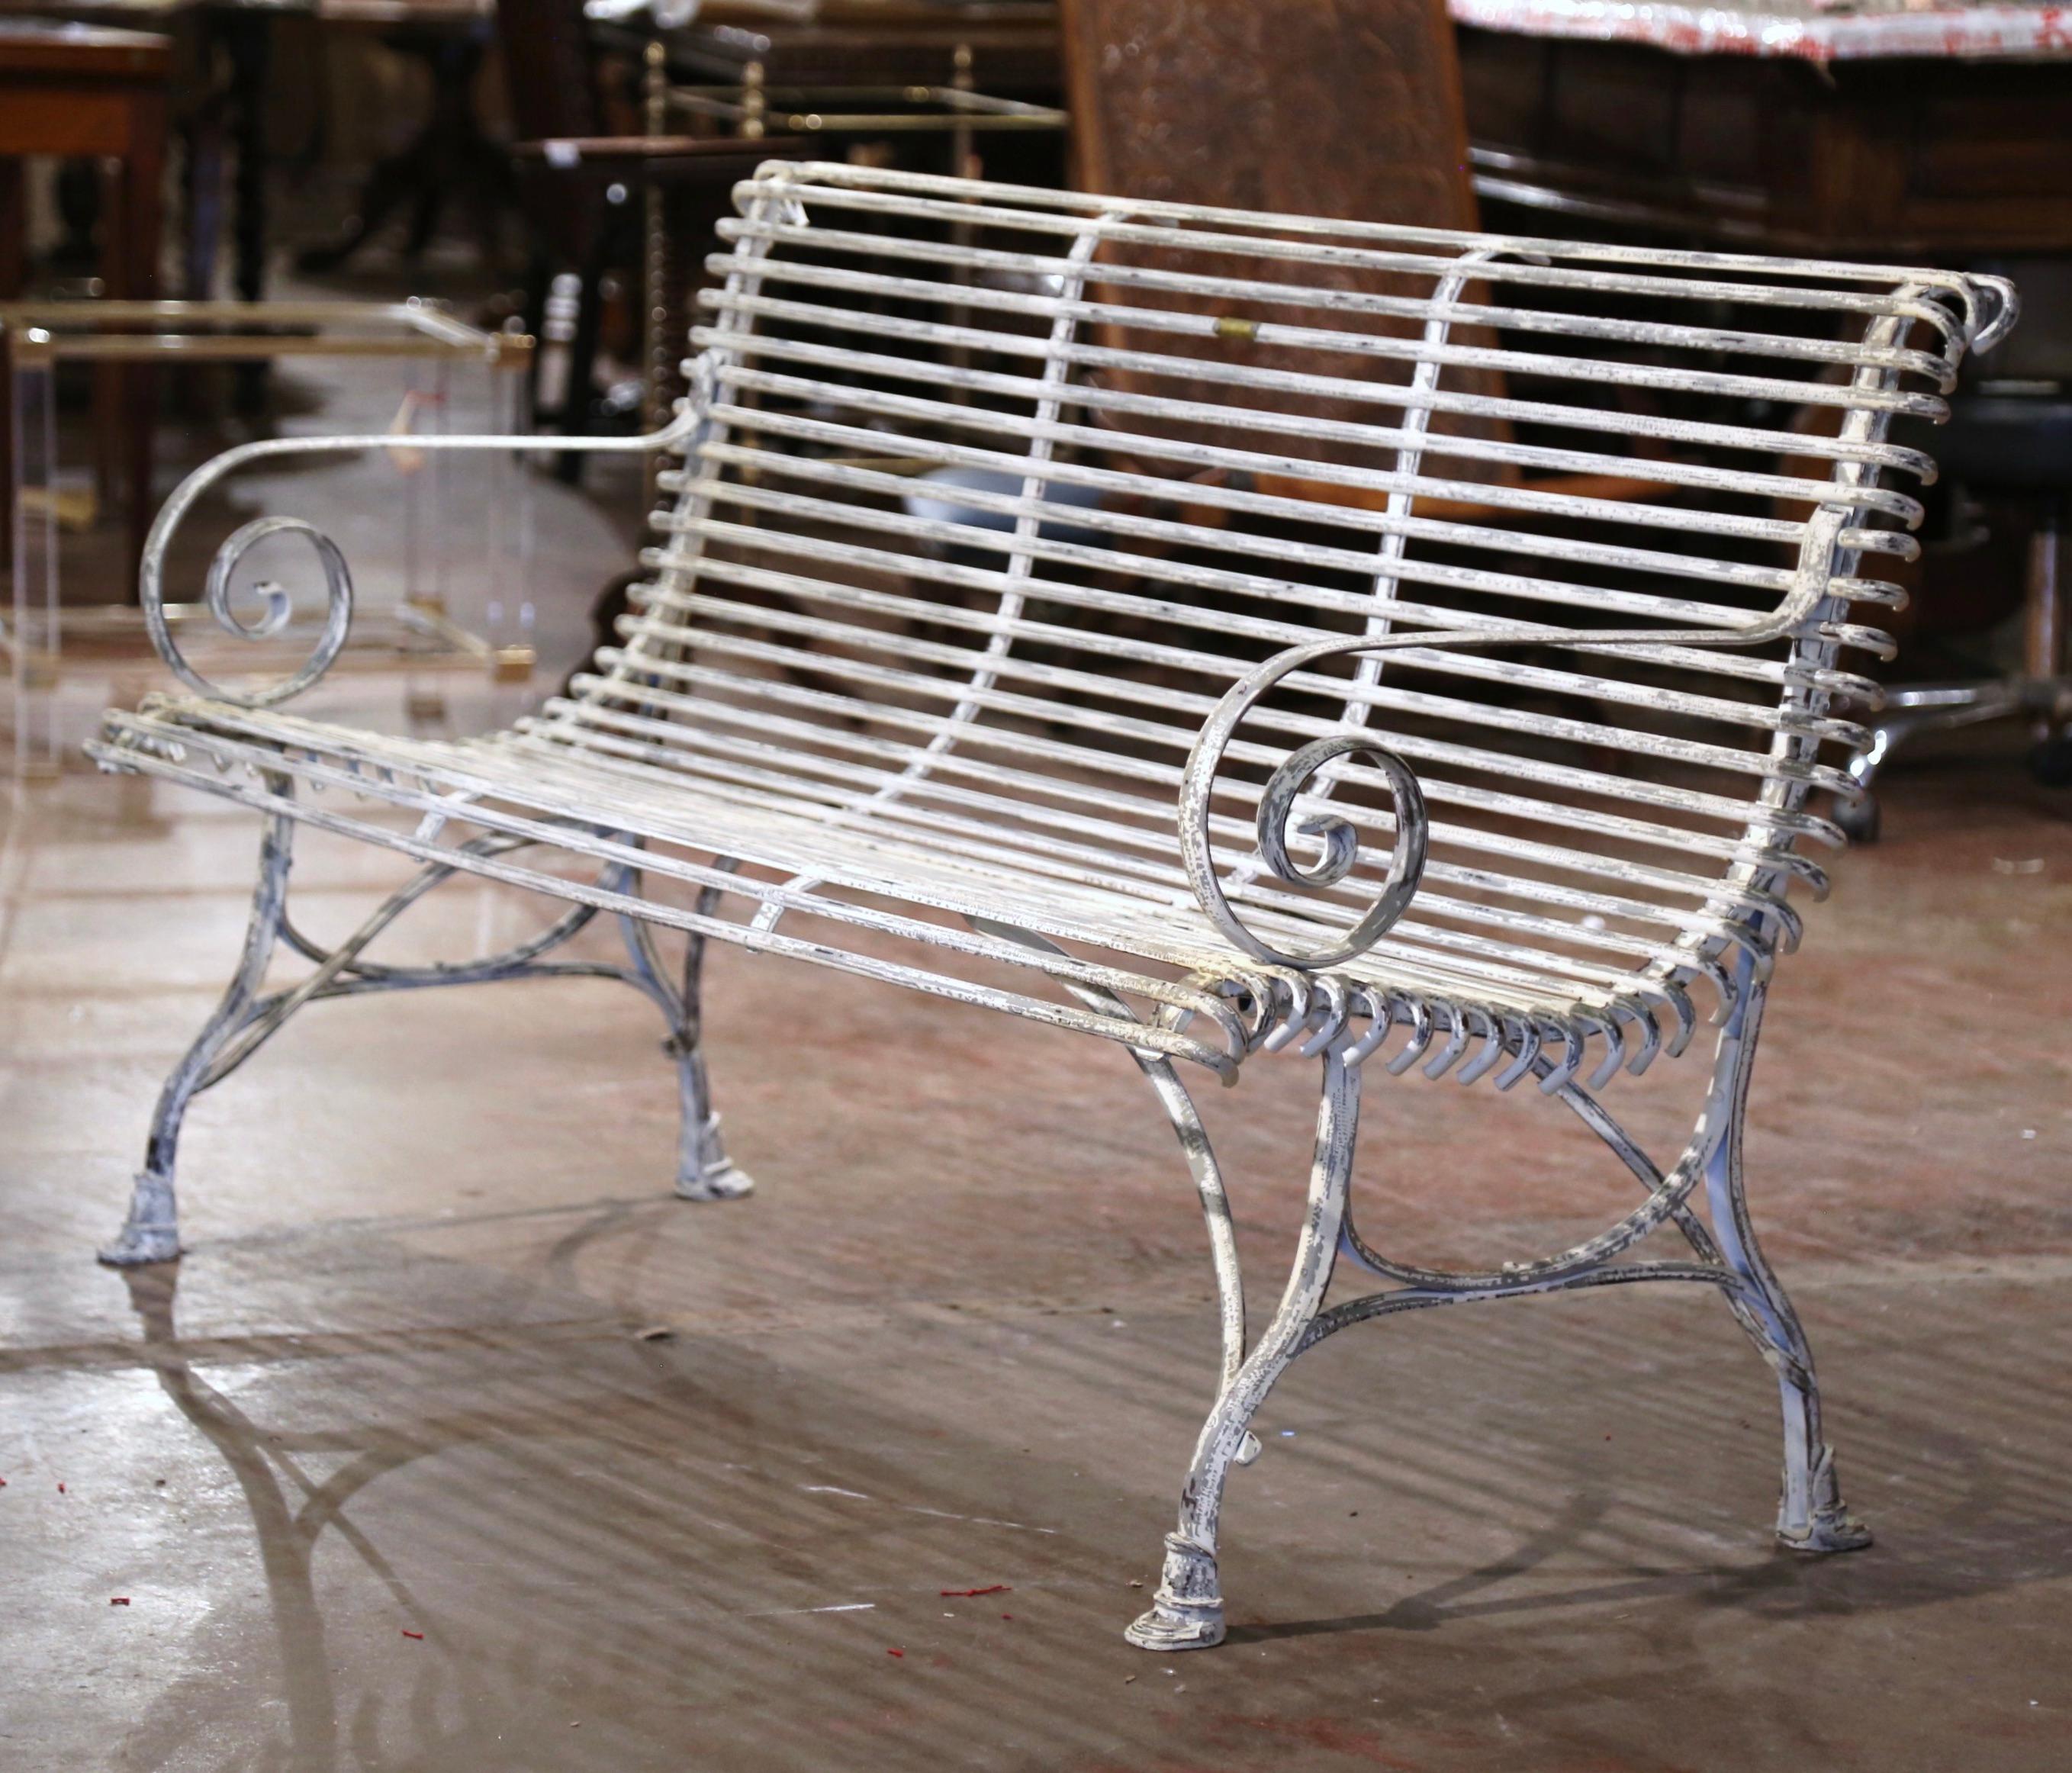 Add extra seating to a garden or outdoor space with this elegant forged iron bench from France. Complete with an antique patinated white and gray painted finish, the three-seat bench has gracious lines, beautifully scrolled armrests, a curved back